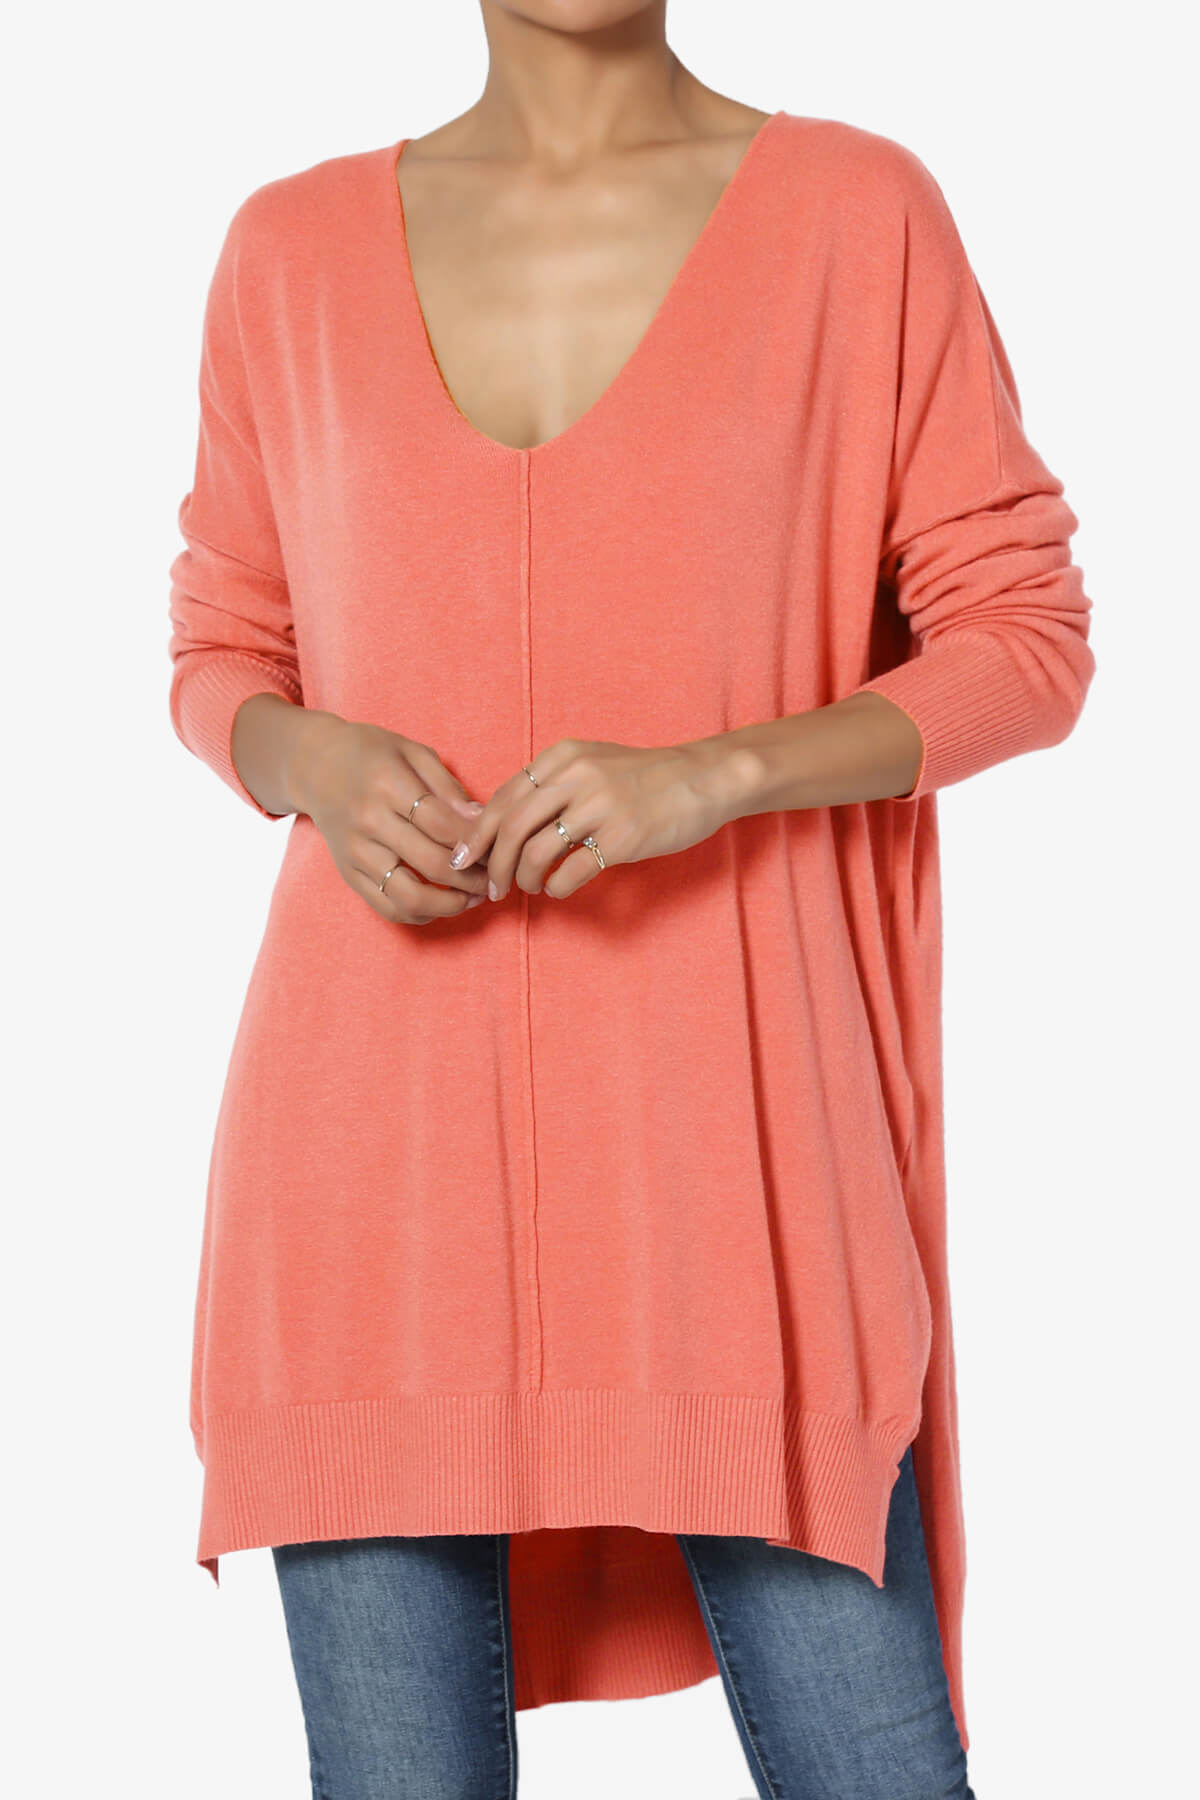 Load image into Gallery viewer, Katana Front Seam V-Neck Knit Sweater CORAL_1
